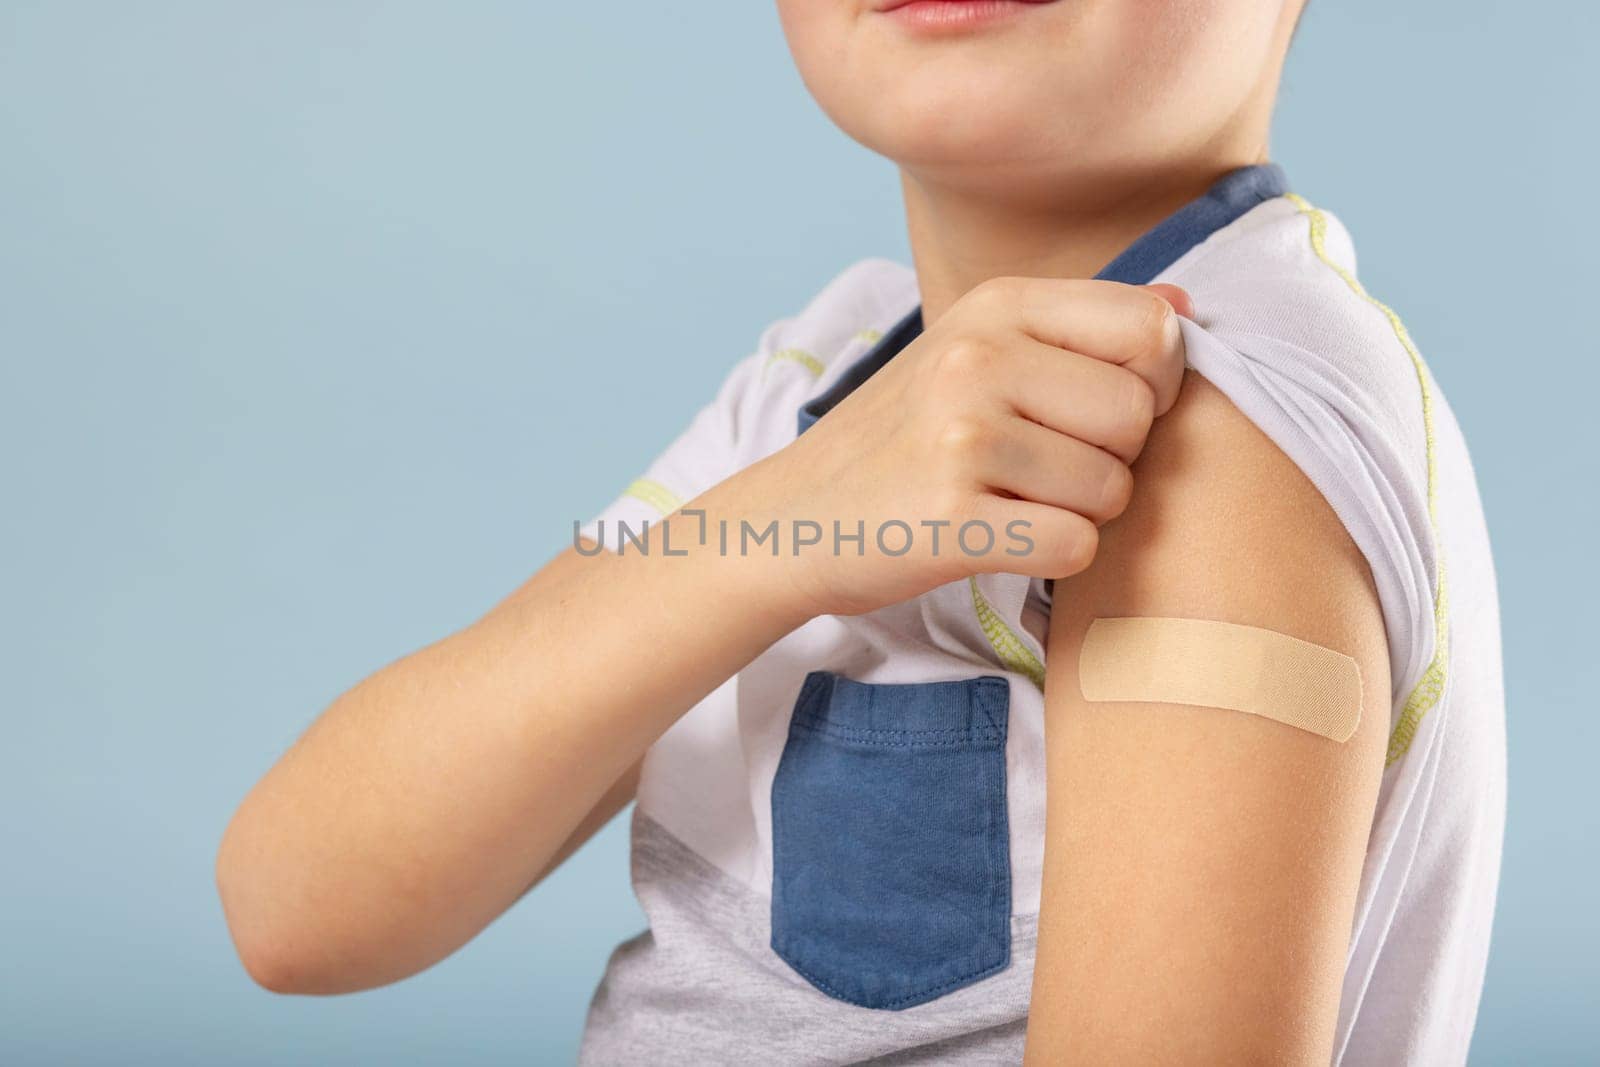 Vaccinated kid boy showing arm with adhesive bandage after vaccine injection by andreyz